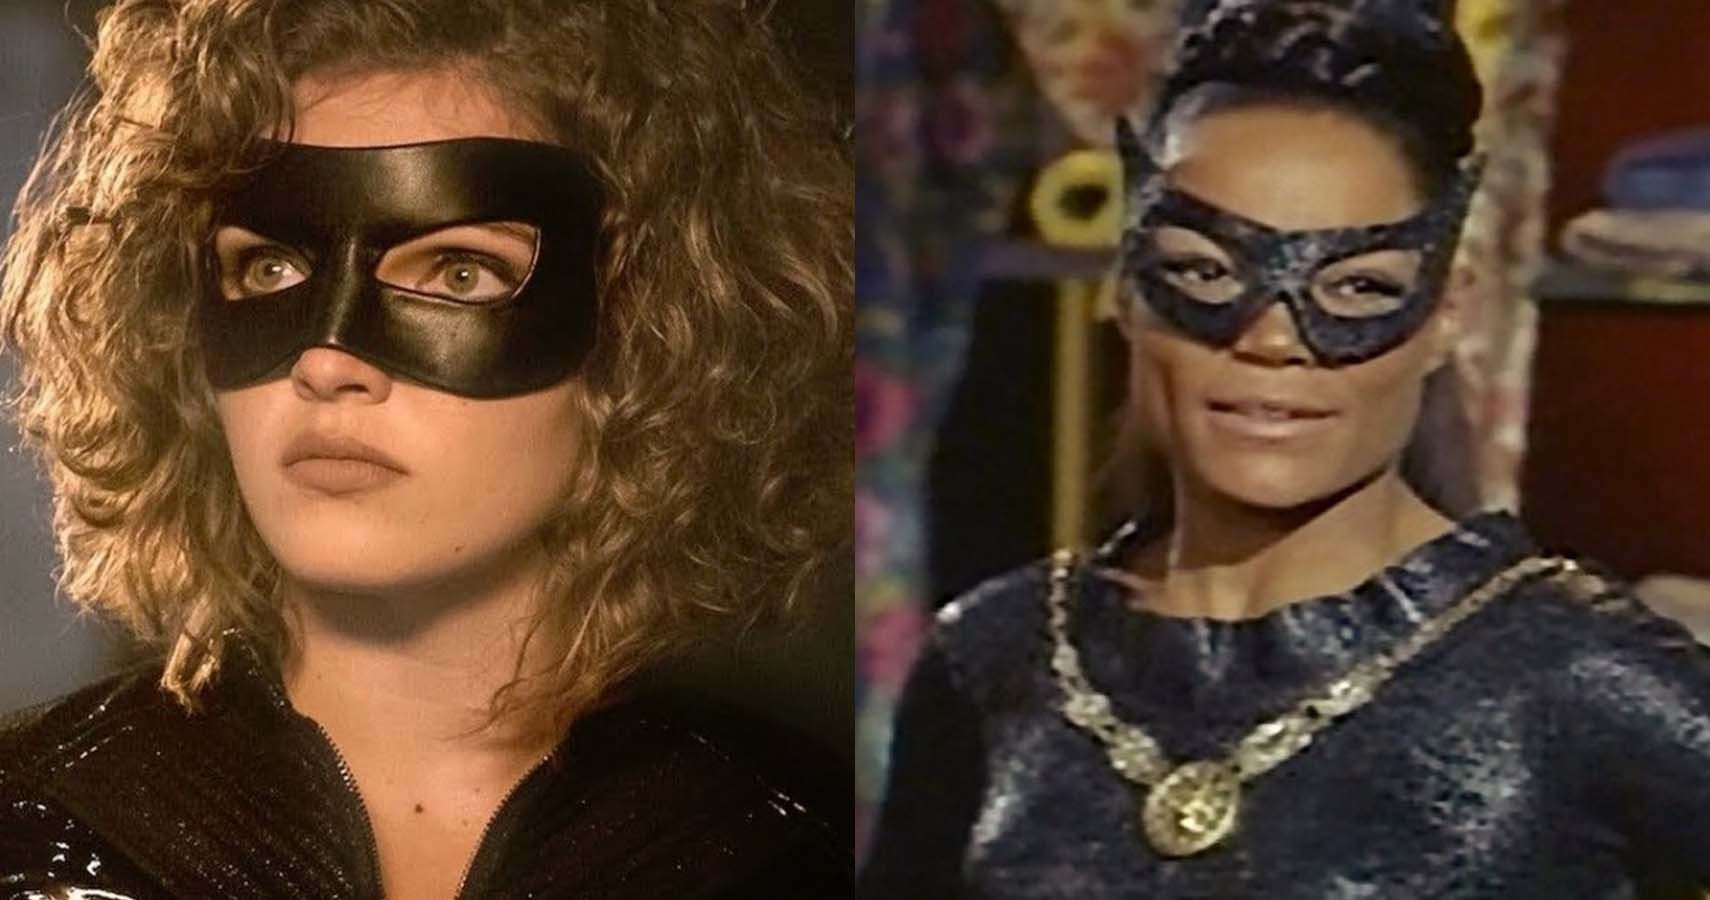 10 Best Portrayals Of Catwoman In Movies, TV & Video Games, Ranked